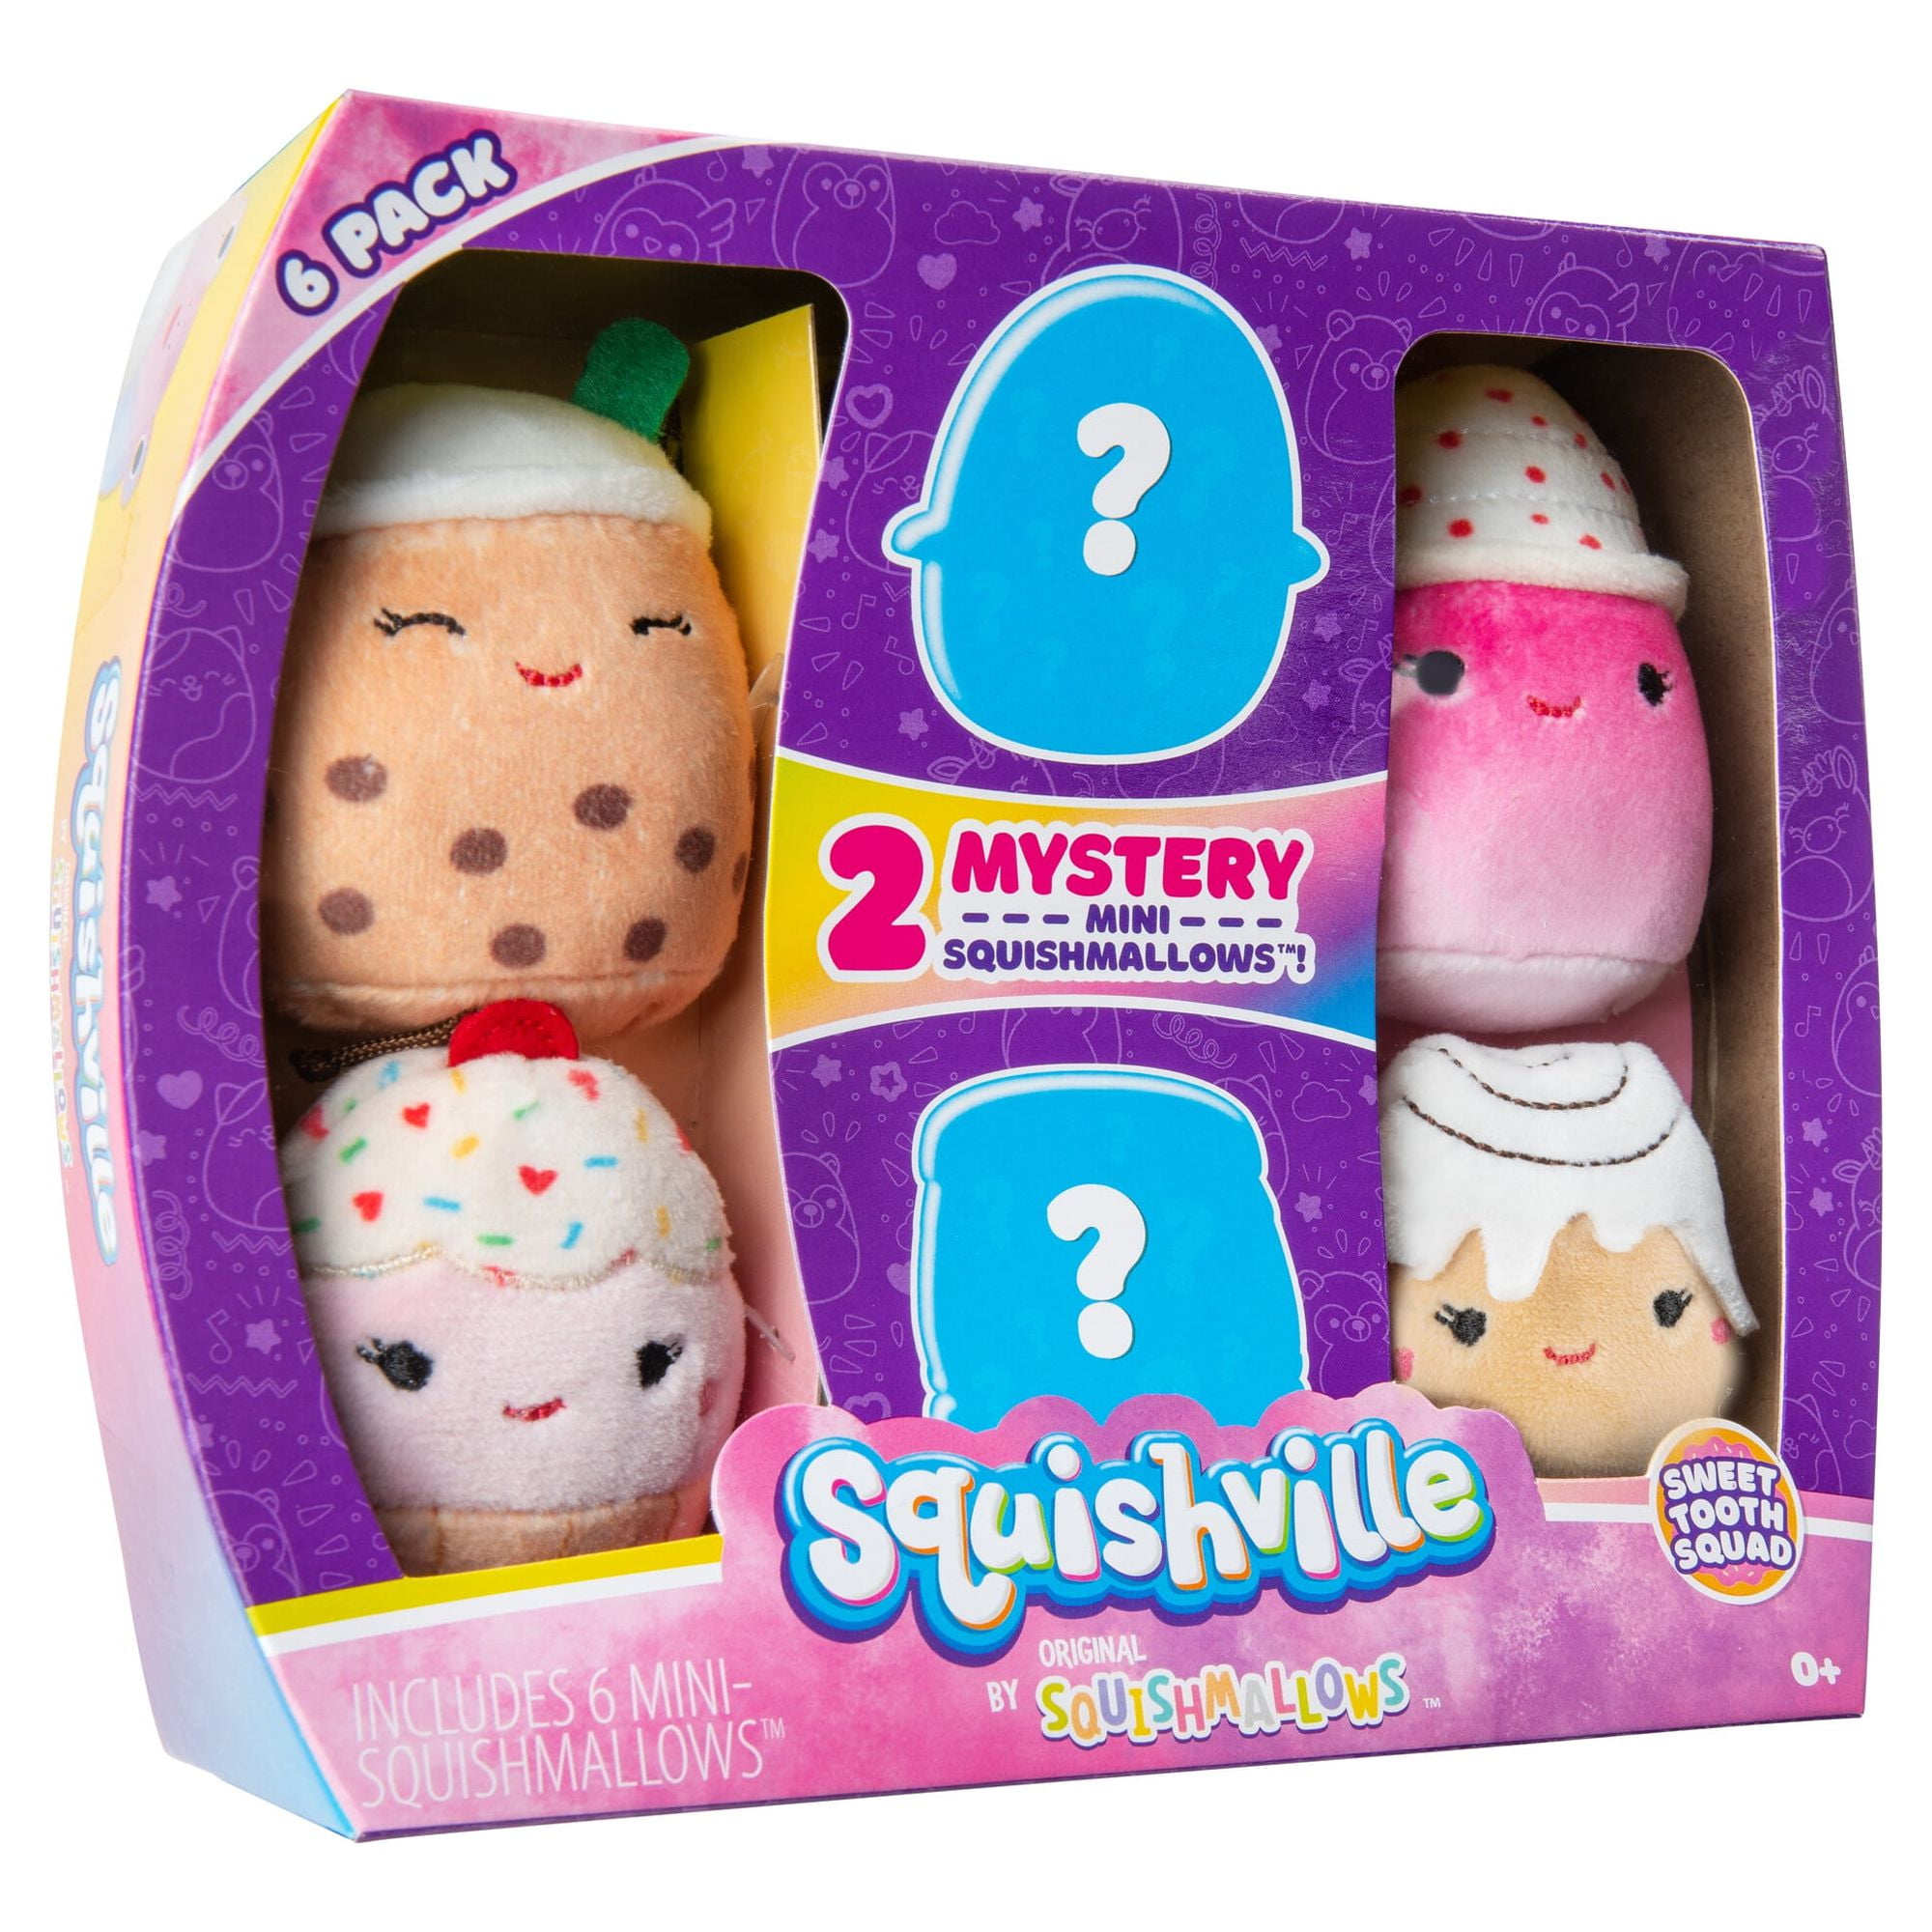 Squishville by The Original Squishmallows Holiday Calendar - 24 Exclusive  2” Festive Squishmallows - Seasonal Toys for Kids and Preschoolers - Ages  3+ : Toys & Games 